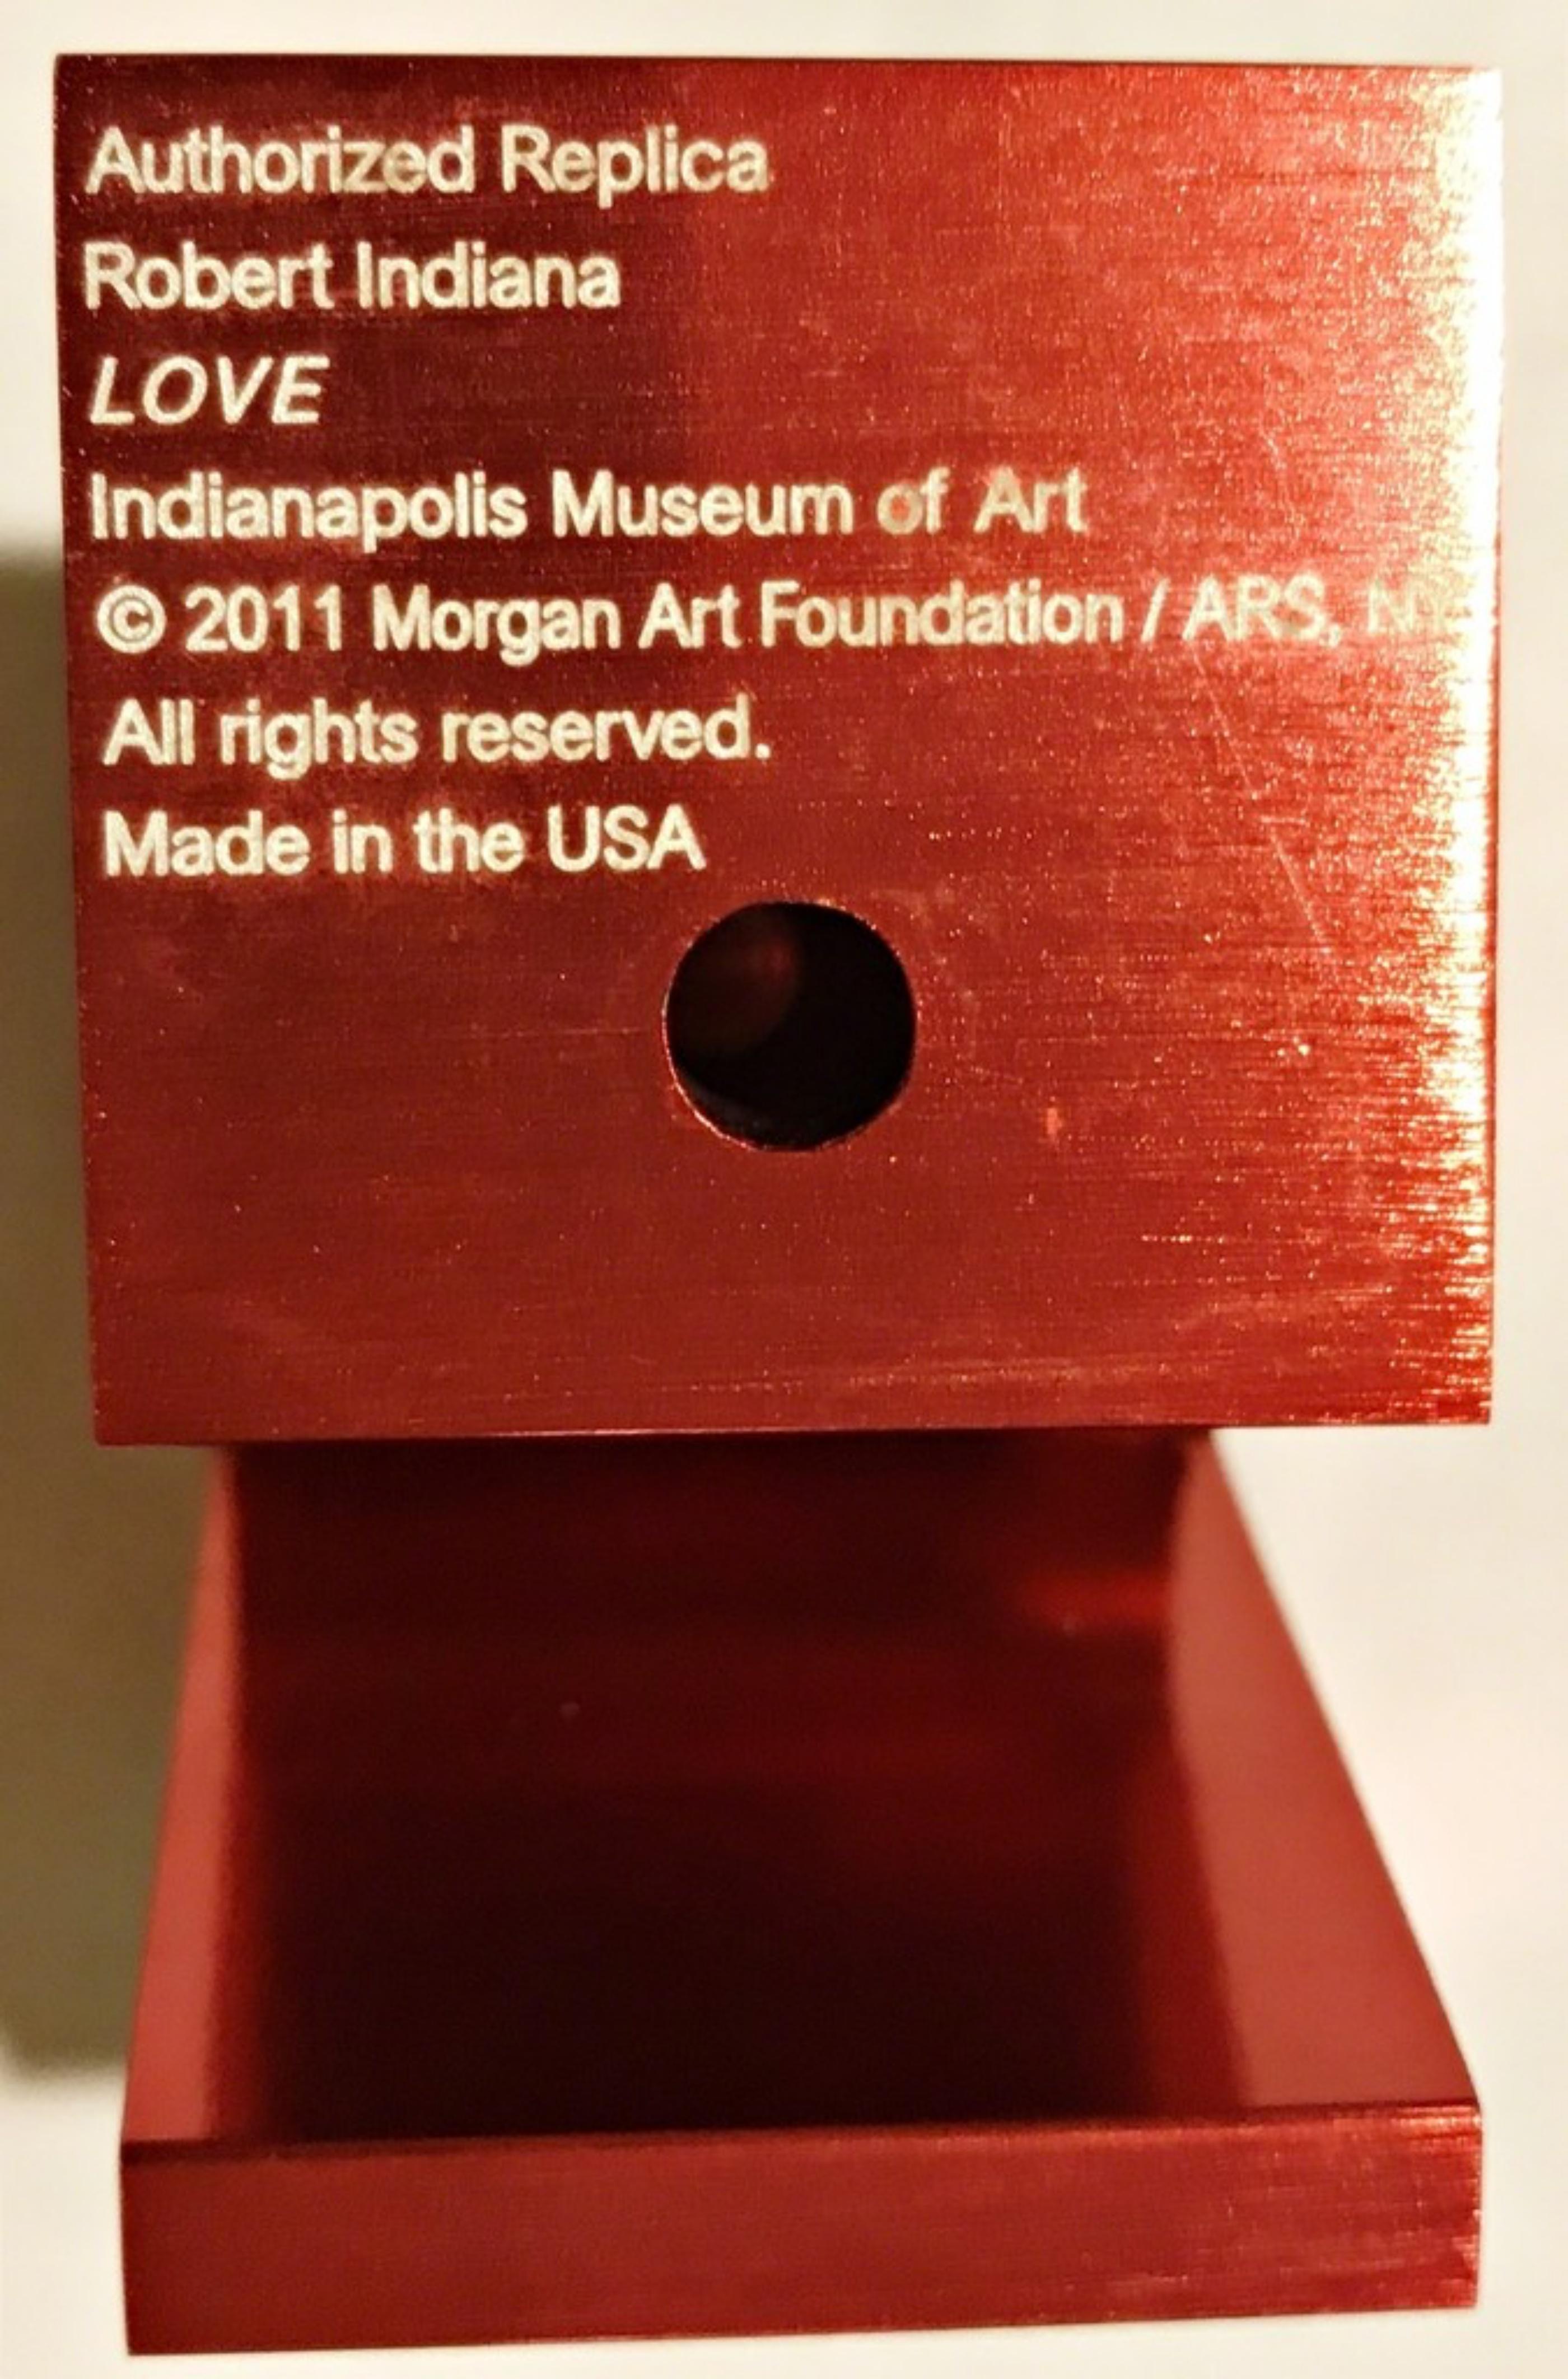 Robert Indiana
LOVE (Official Artist Copyright and Foundation Stamp), 2011
Brushed Aluminum sculpture (Red)
Stamped by artist's estate, Stamped 